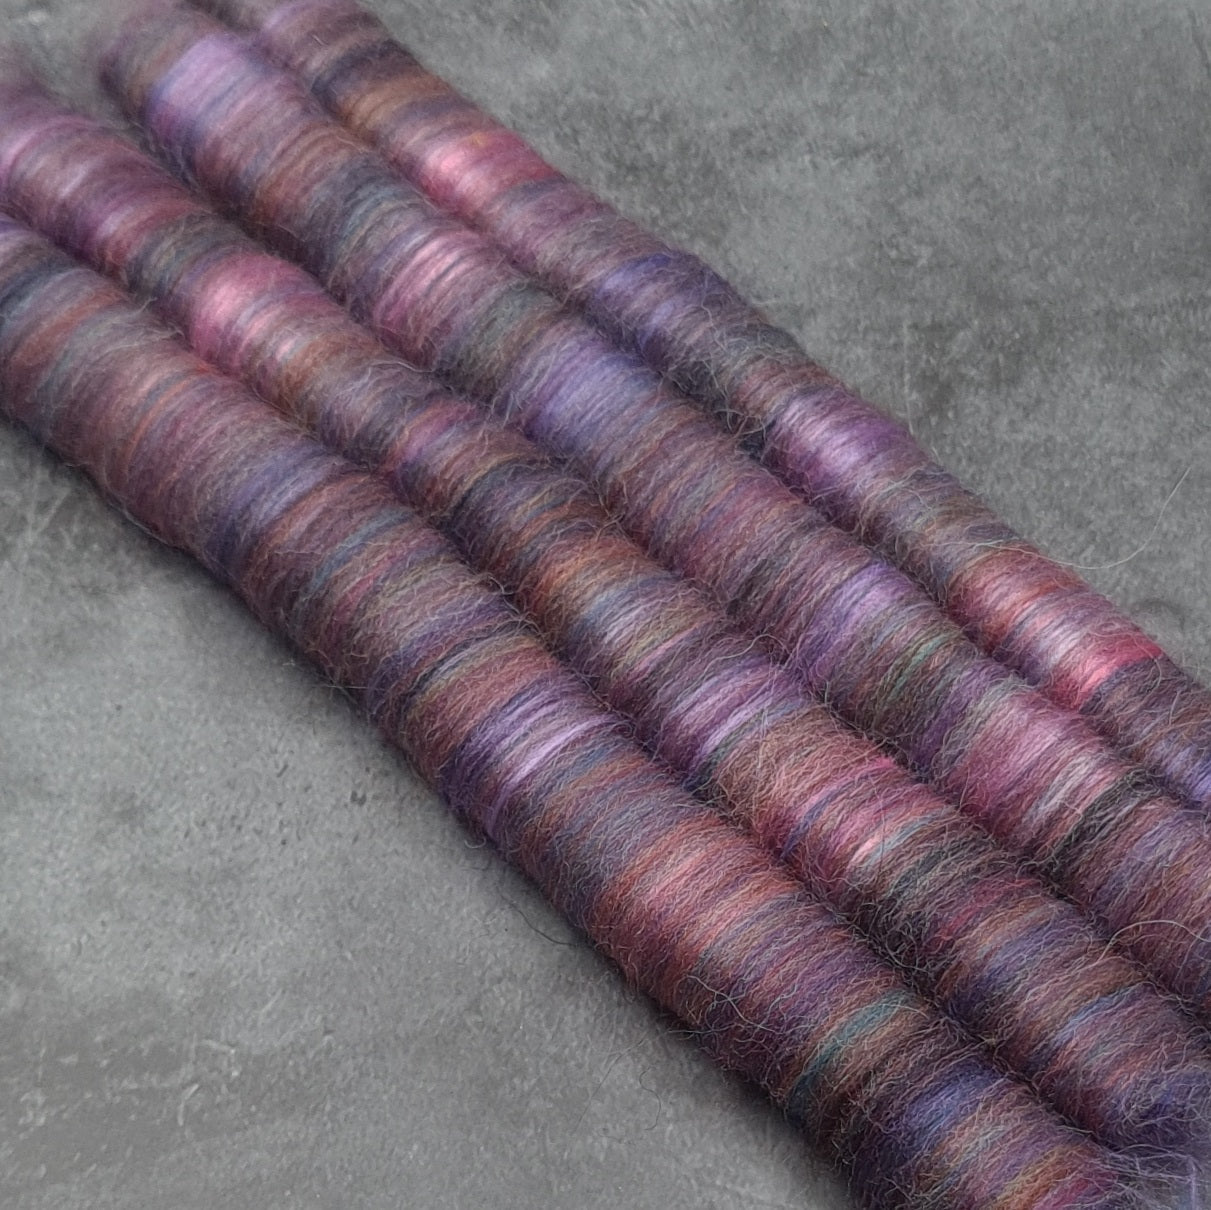 Rolags (or Punis) for spinning, Cadnam,  Wool and Bamboo, Limited Edtion